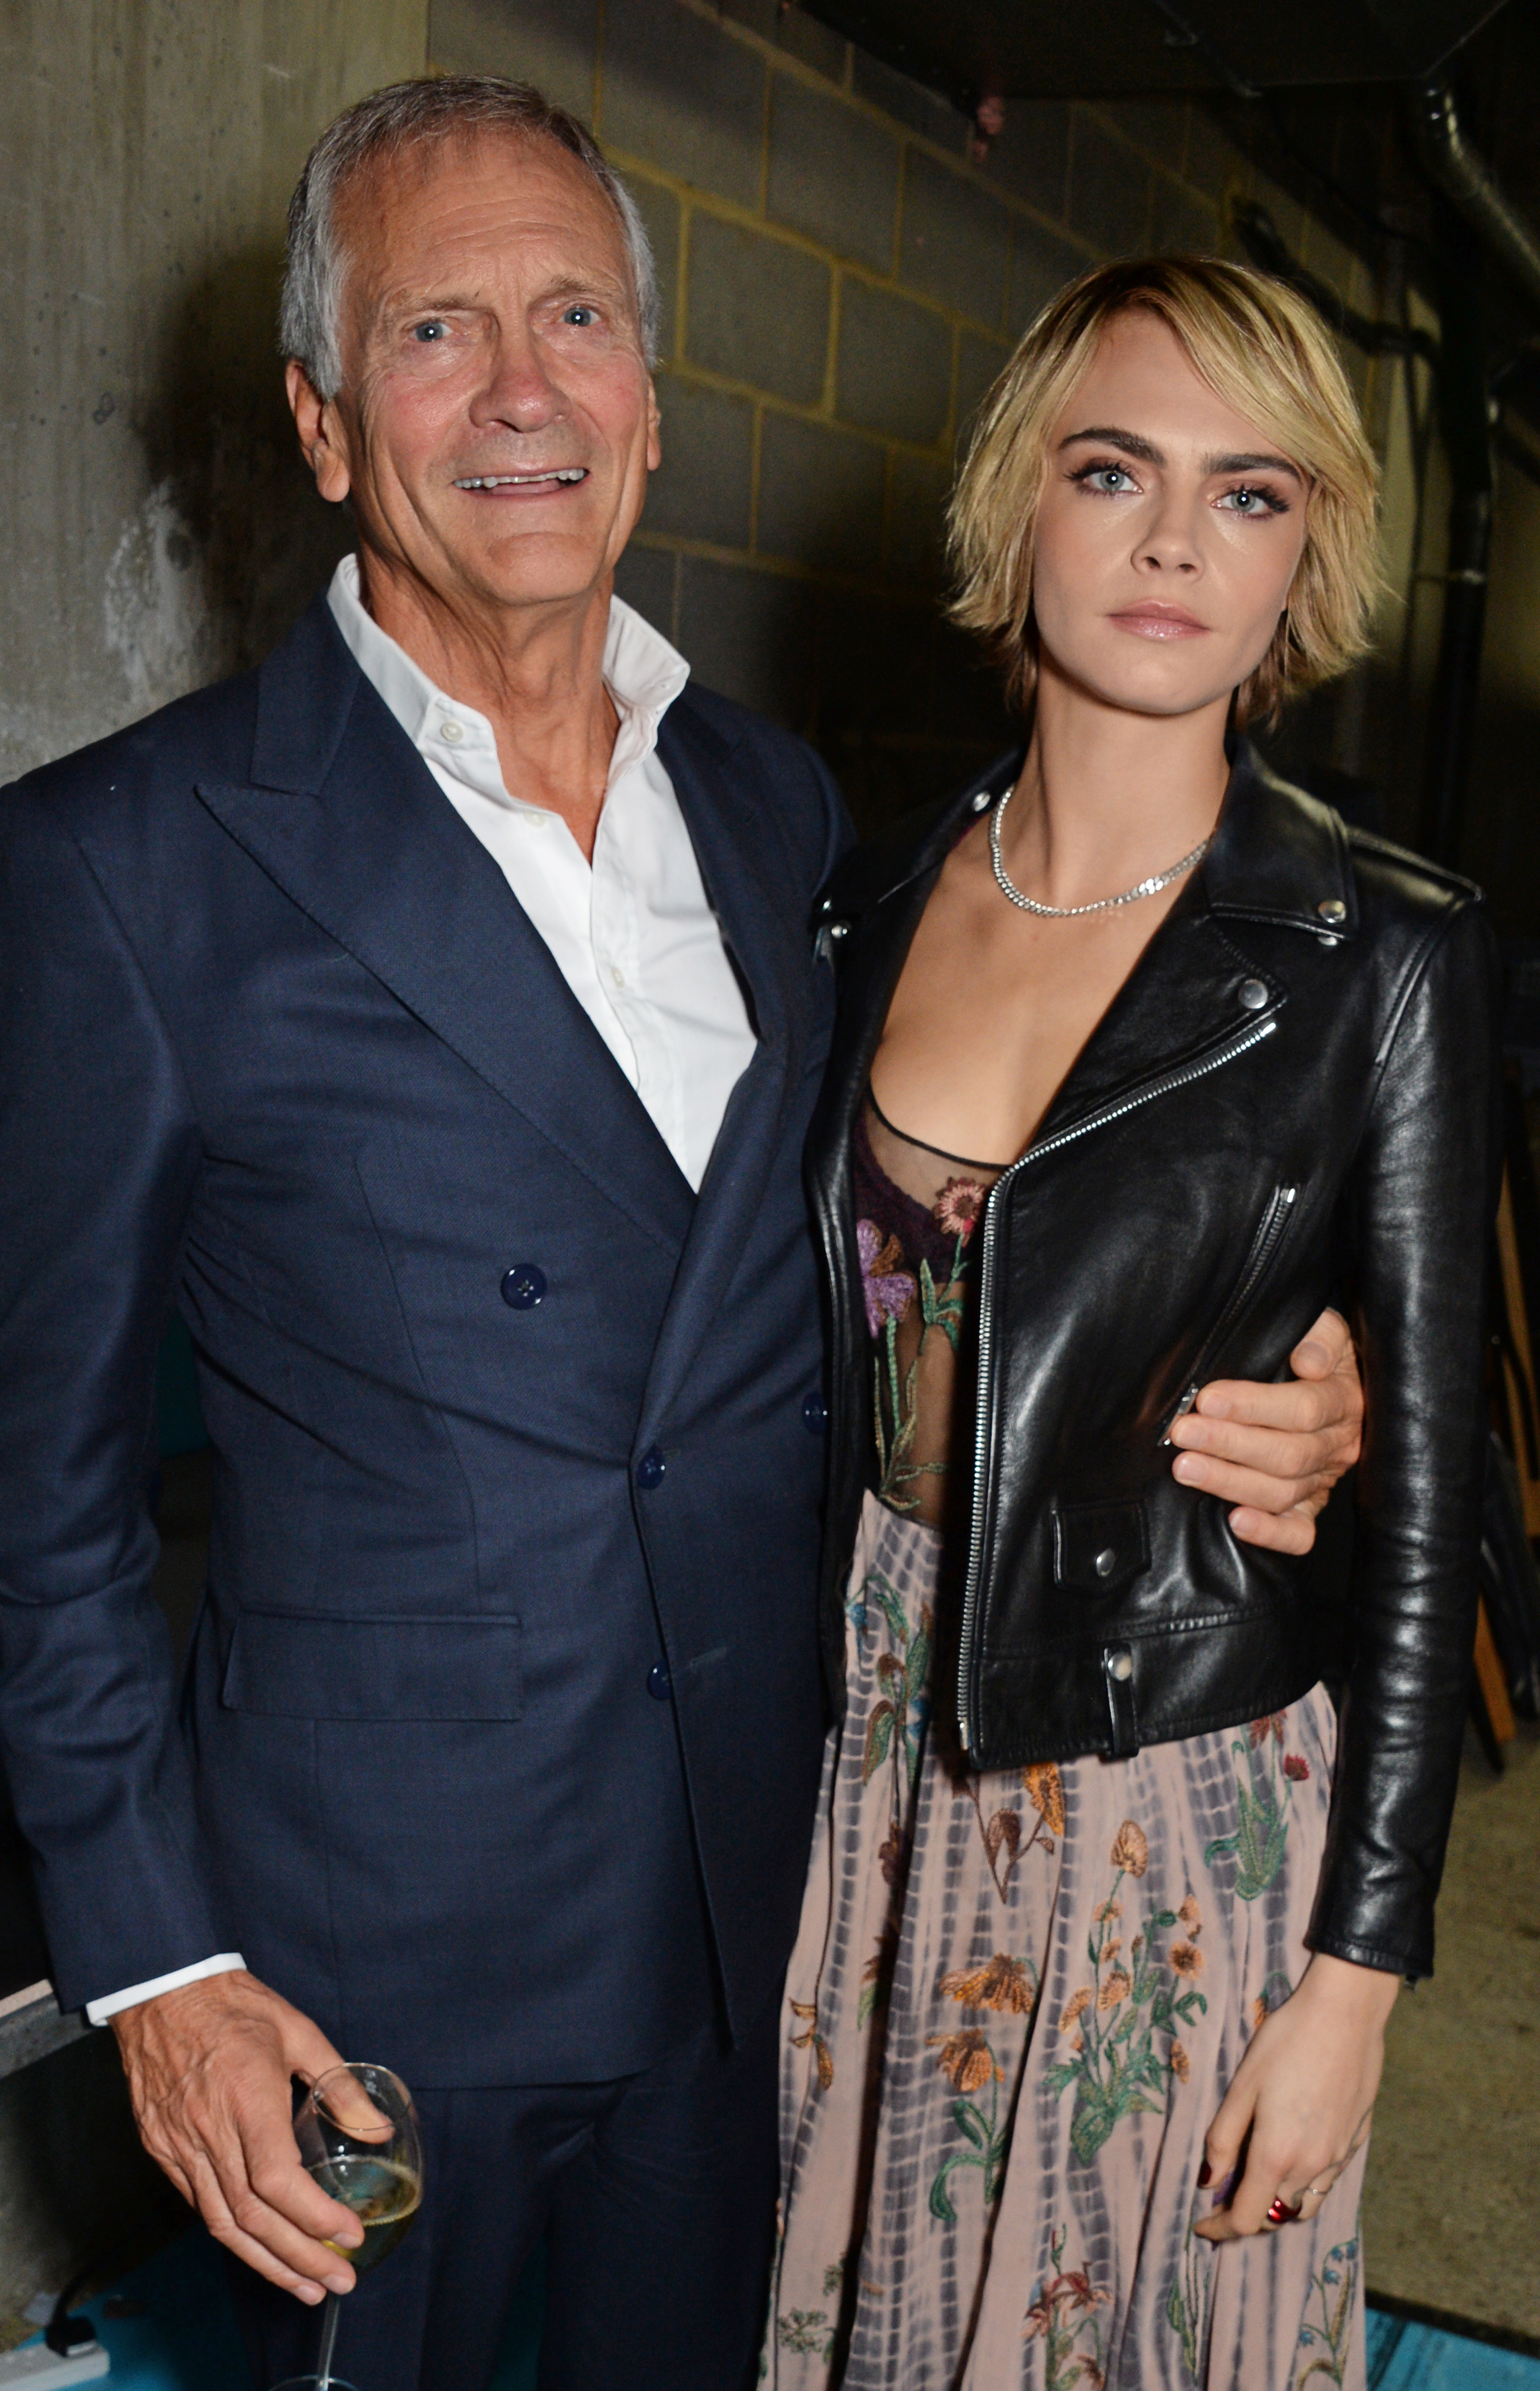 Charles Delevingne and Cara Delevigne pose at the TAG Heuer auction featuring unseen art work from the "Don't Crack Under Pressure" Campaign in association with Cara Delevingne and David Yarrow at Maddox Gallery on October 22, 2018, in London, England | Source: Getty Images